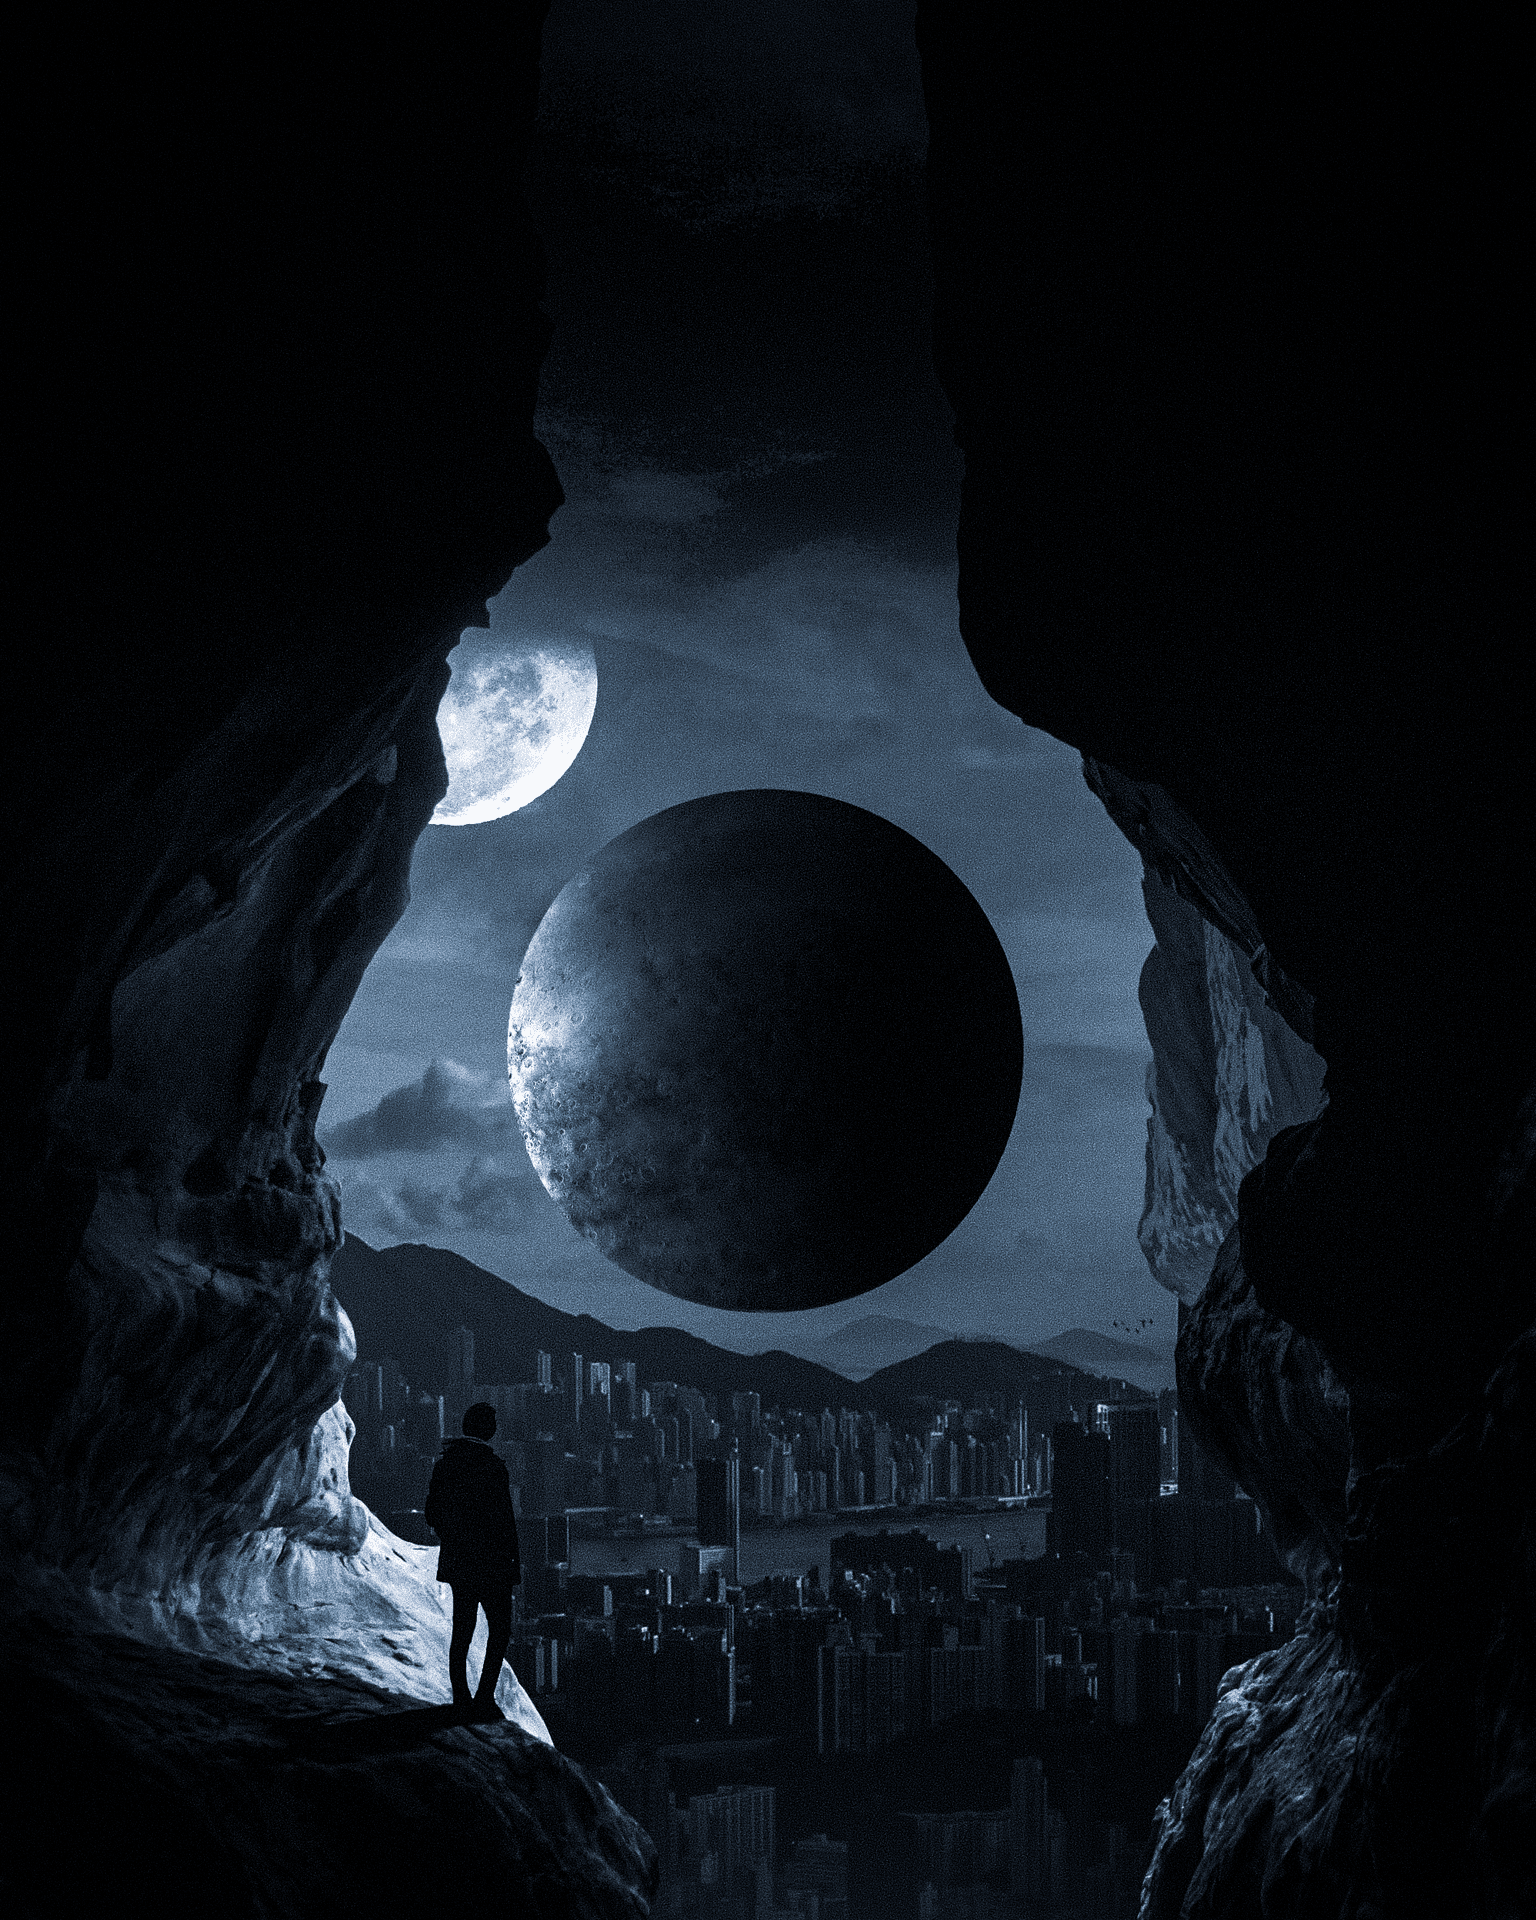 An artwork showing a dark moon very close to Earth. A human figure looks at the moon from the mountains.